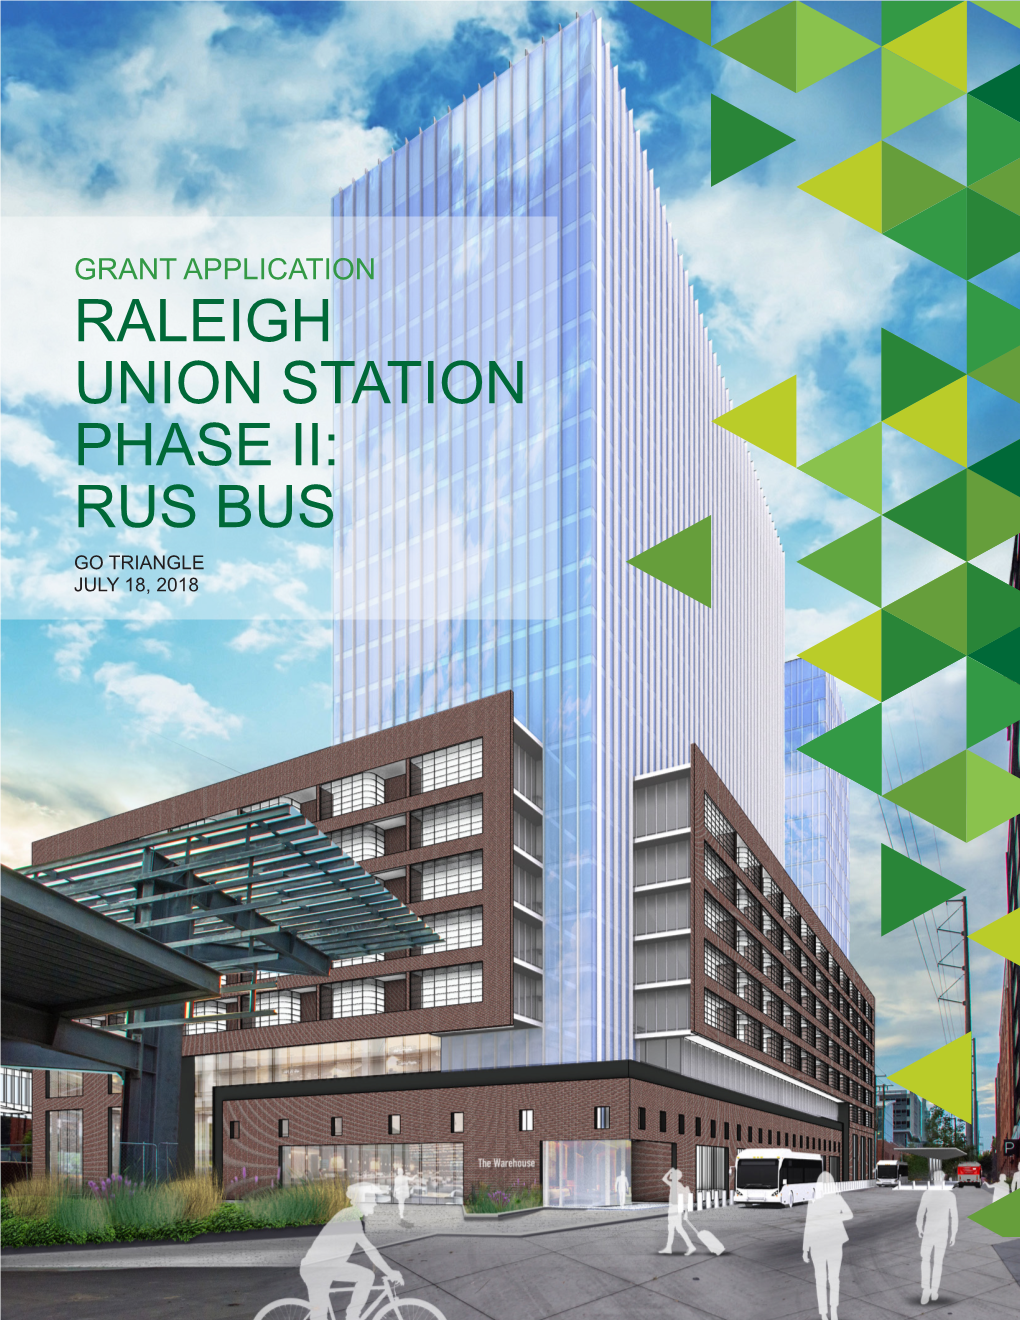 Raleigh Union Station Phase Ii: Rus Bus Go Triangle July 18, 2018